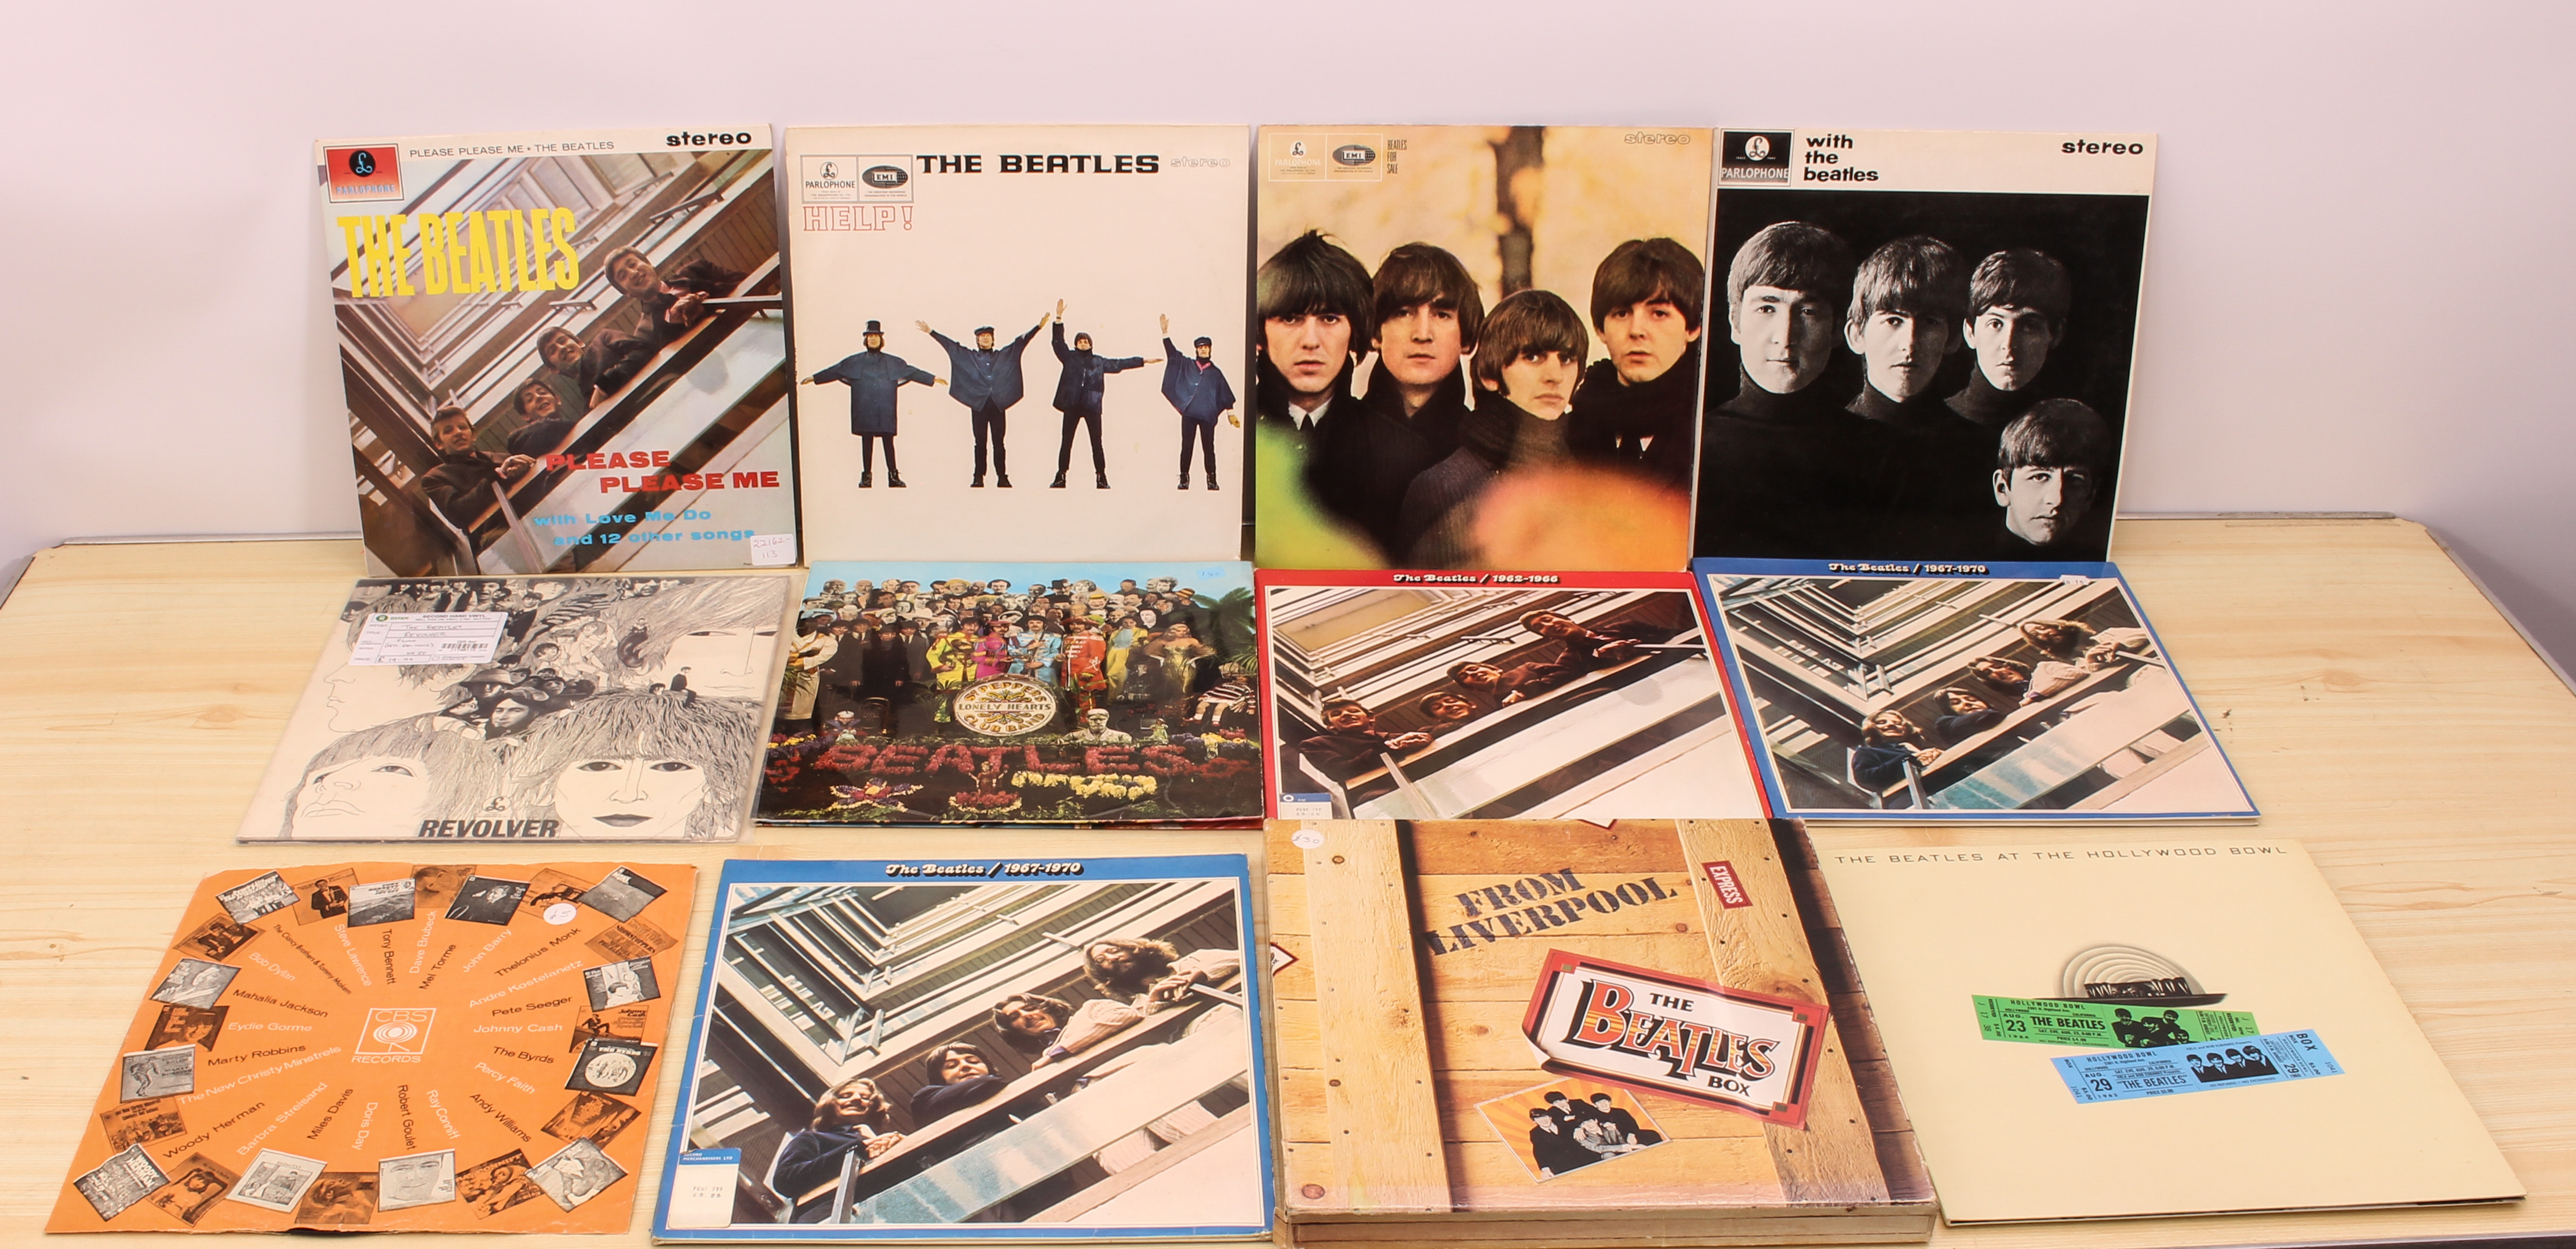 11 albums and one box set by The Beatles to include: Please Please Me; Help!; Beatles For Sale; With